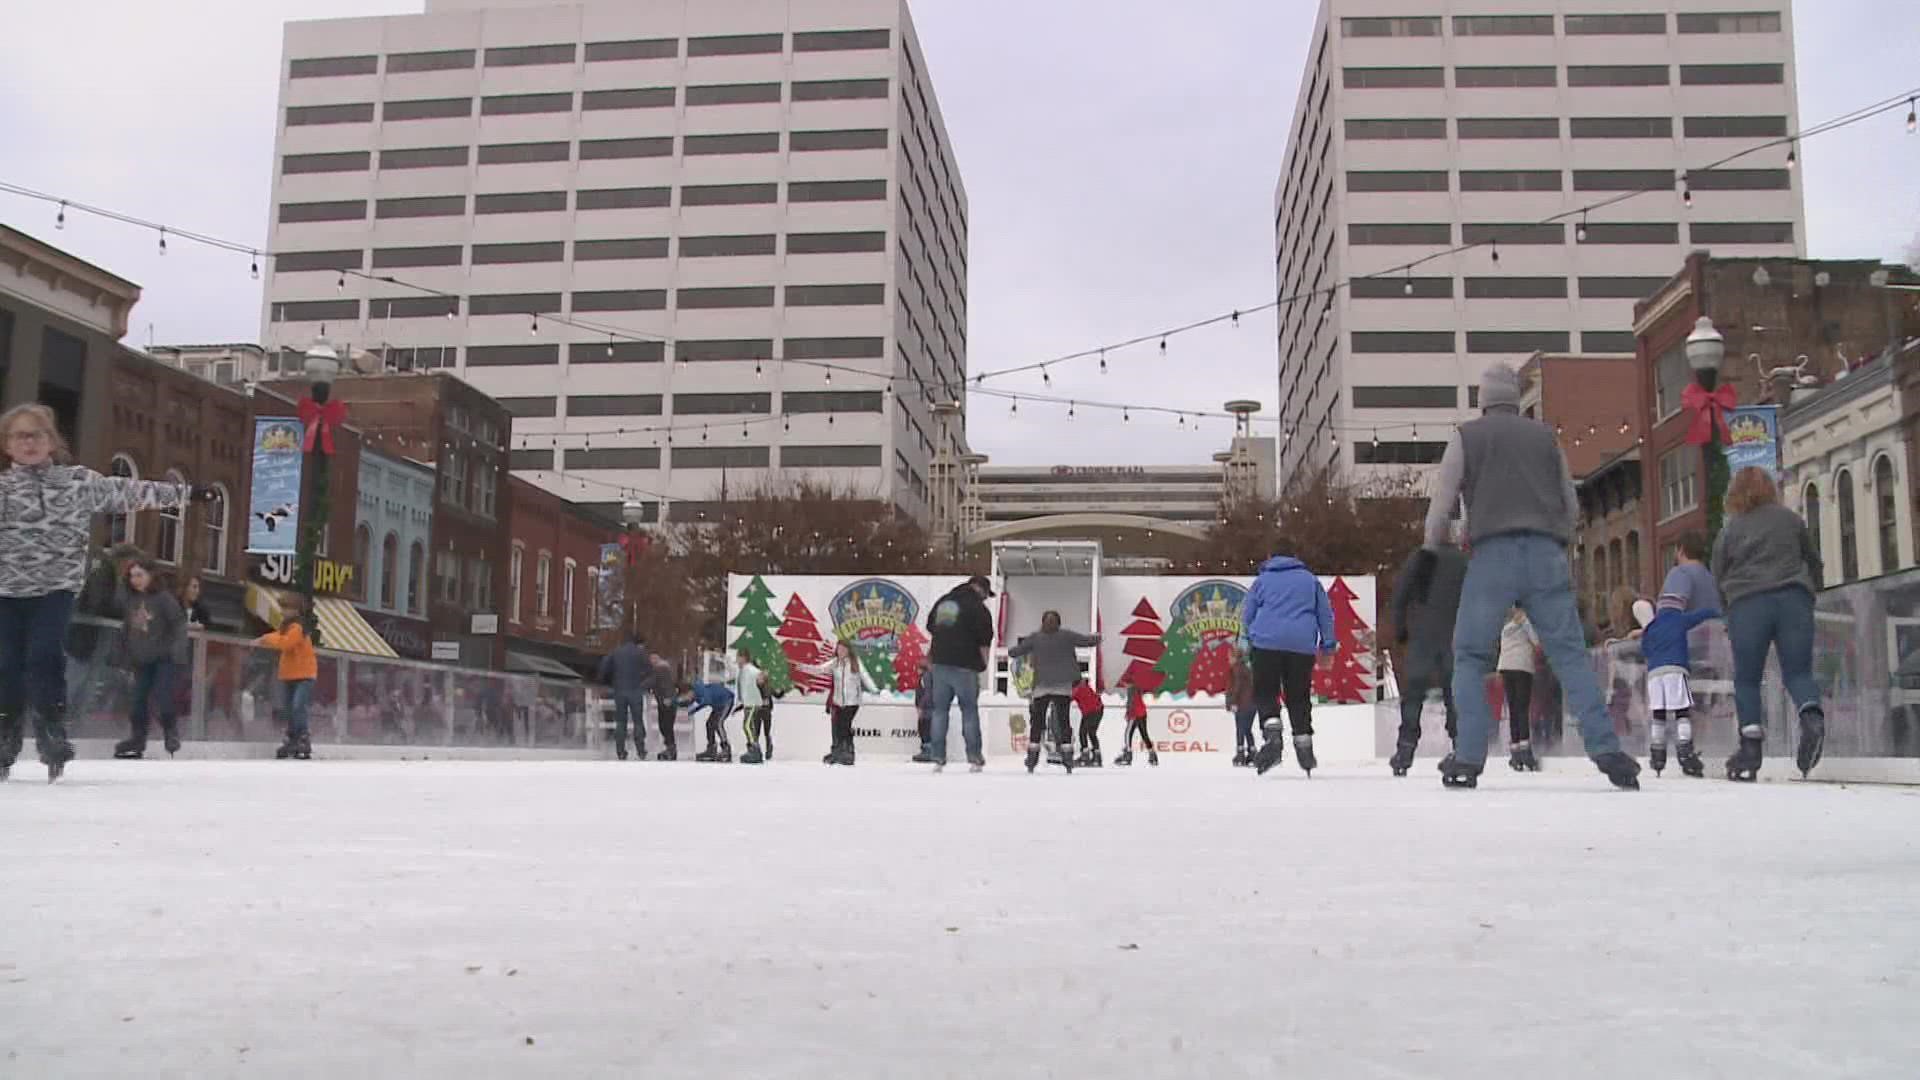 The ice rink is almost ready to go! Friday is the big day for people wanting to skate outdoors.